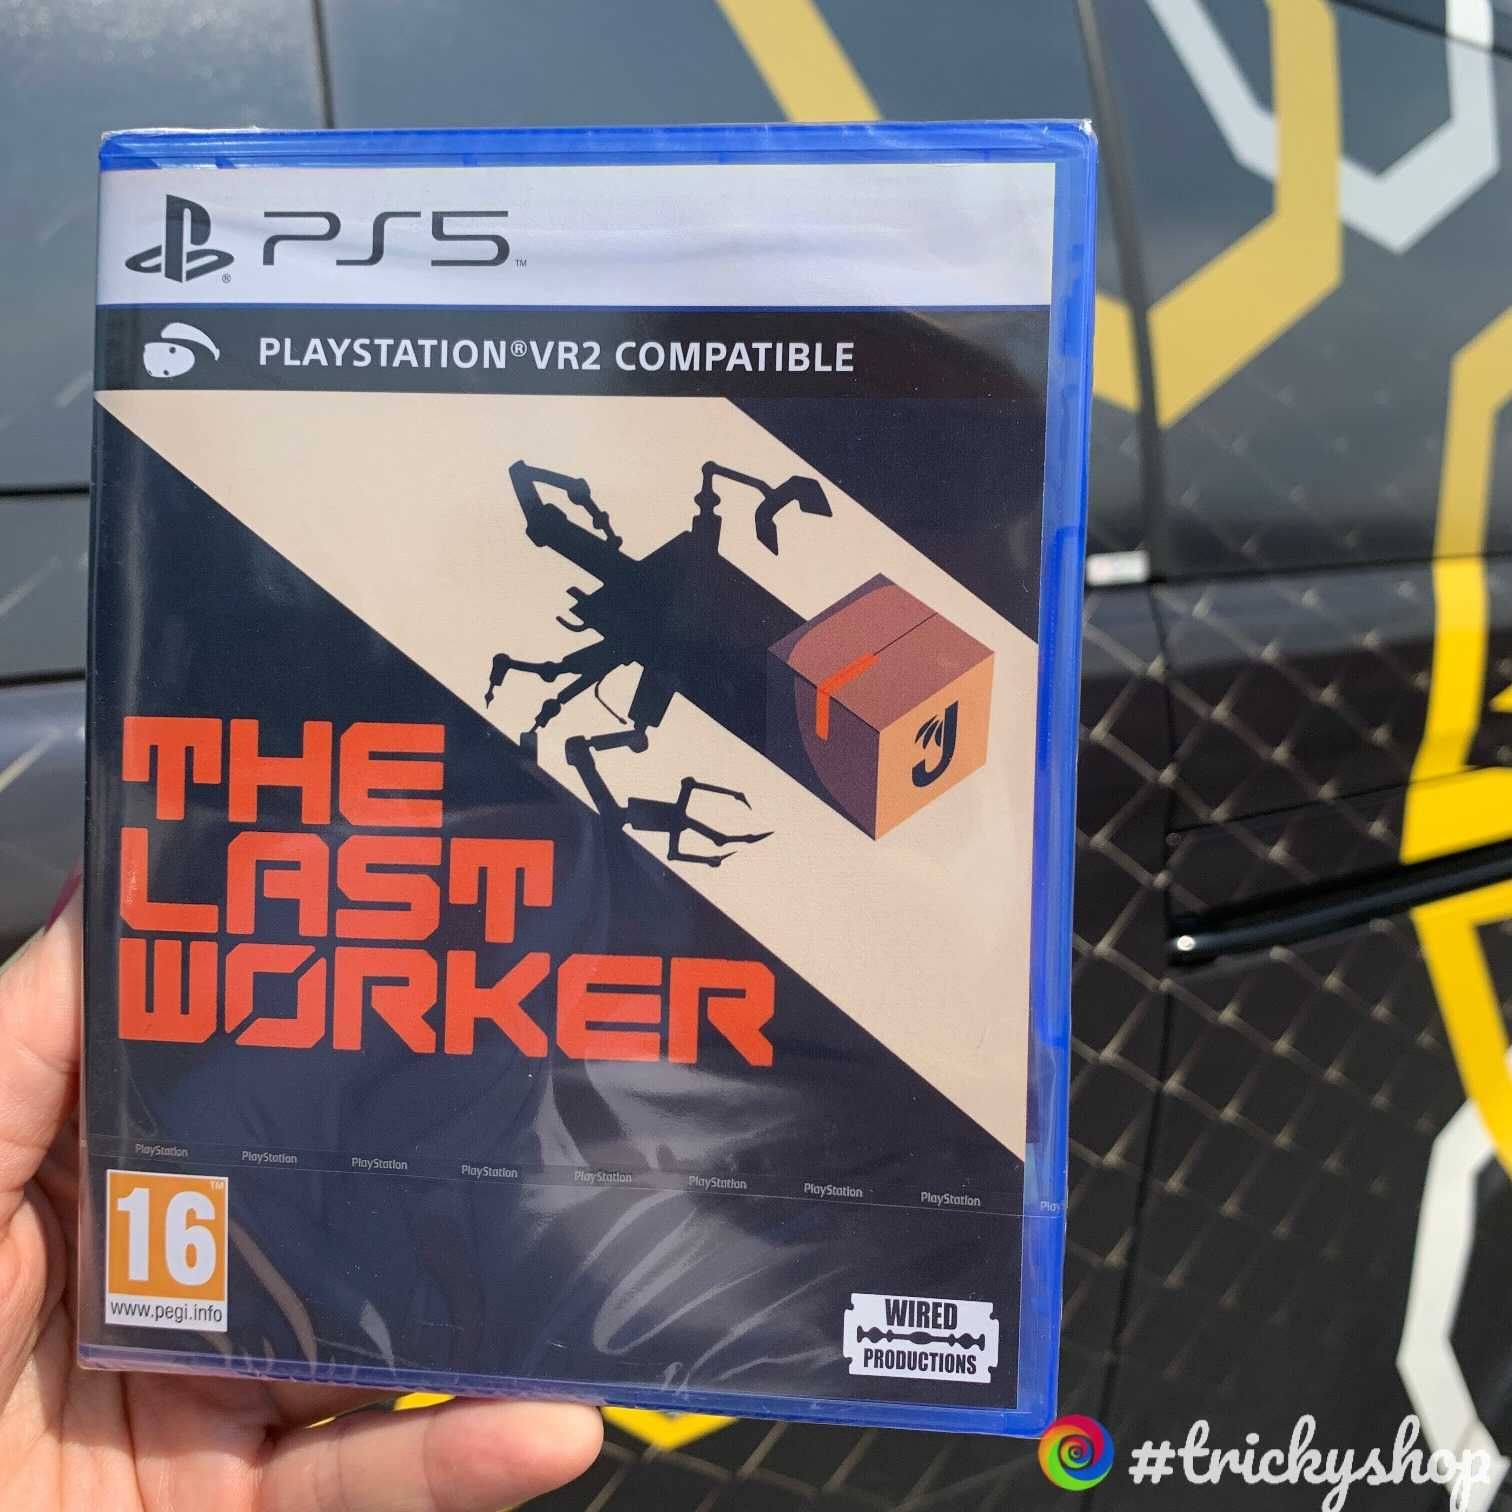 PS5 - The Last Worker (New) for VR2 PPSA 03482